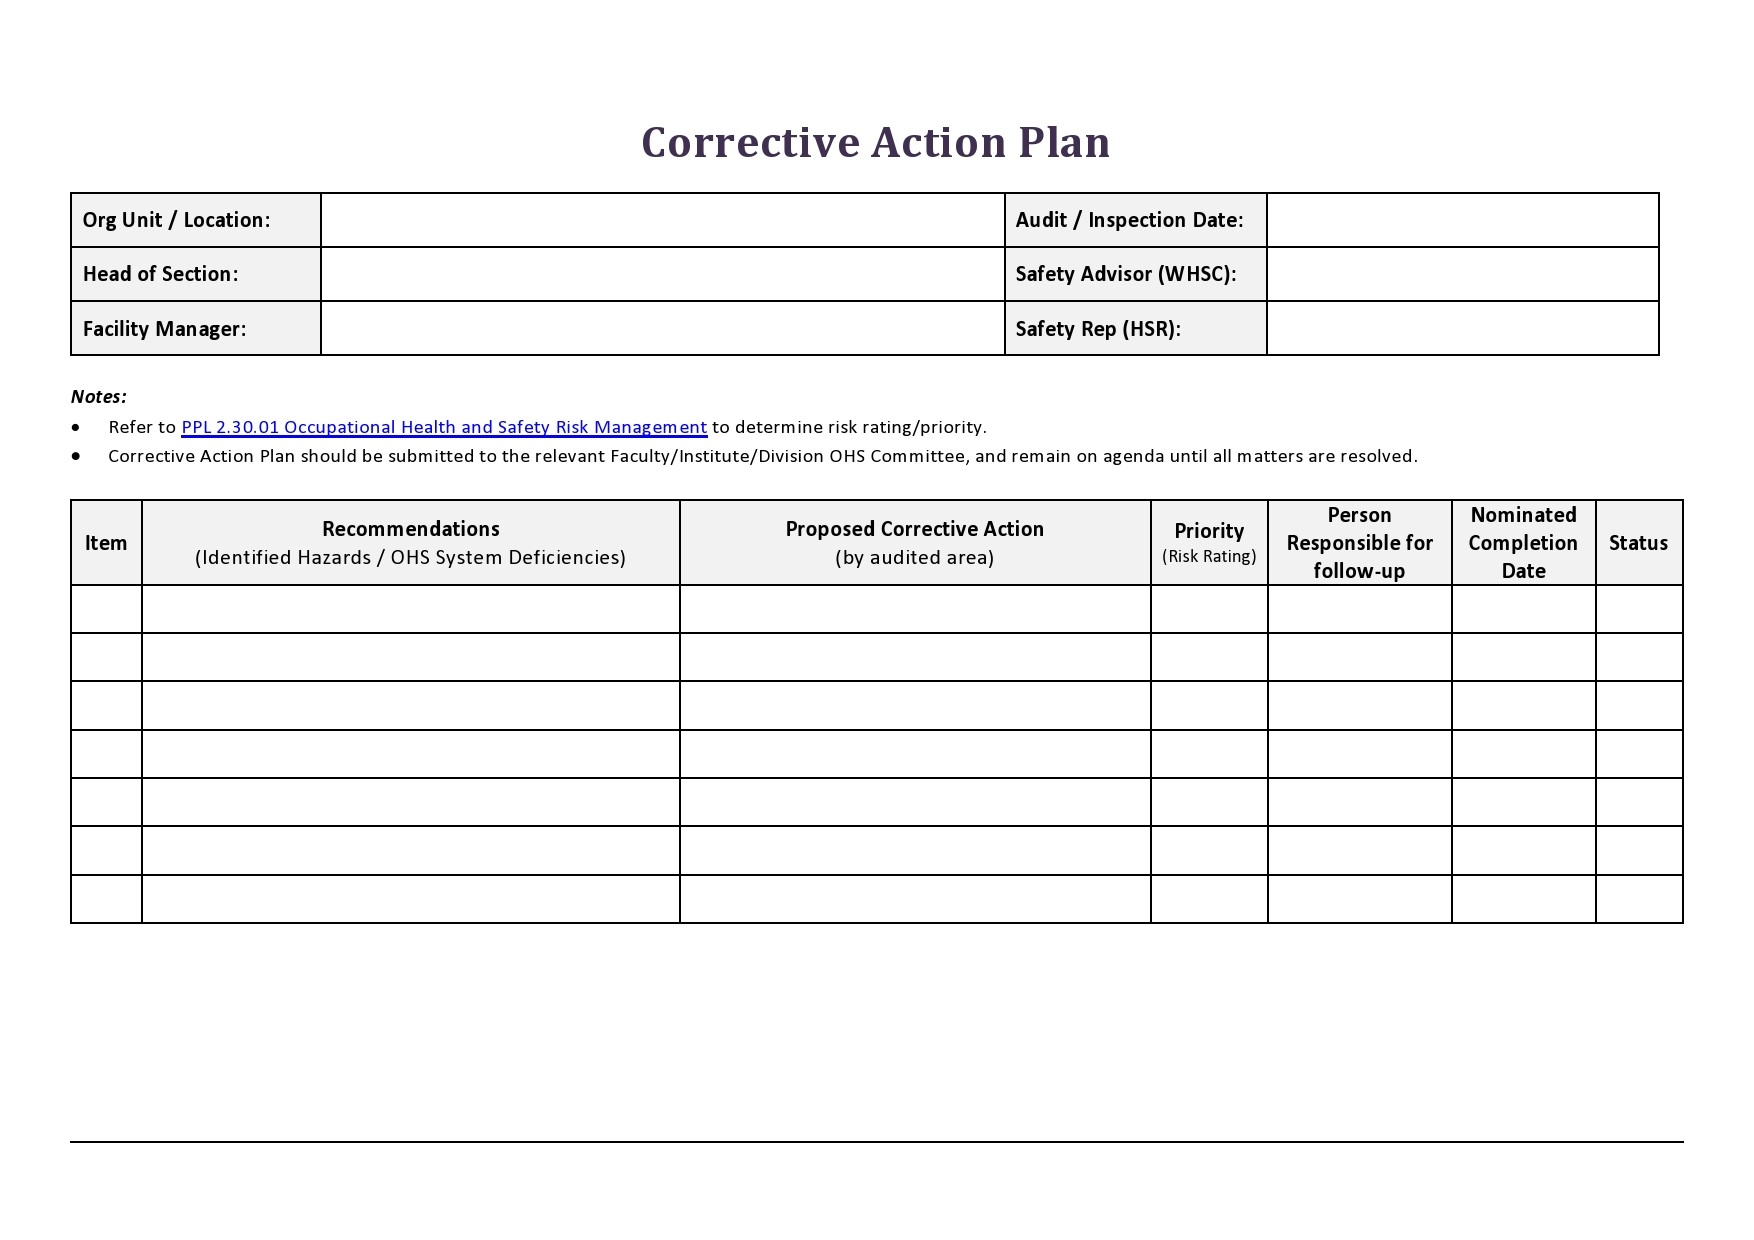 project action plan template, project management action plan template, project management corrective action plan template, project corrective action plan template, personal project action plan template, construction project action plan template, corrective action plan template